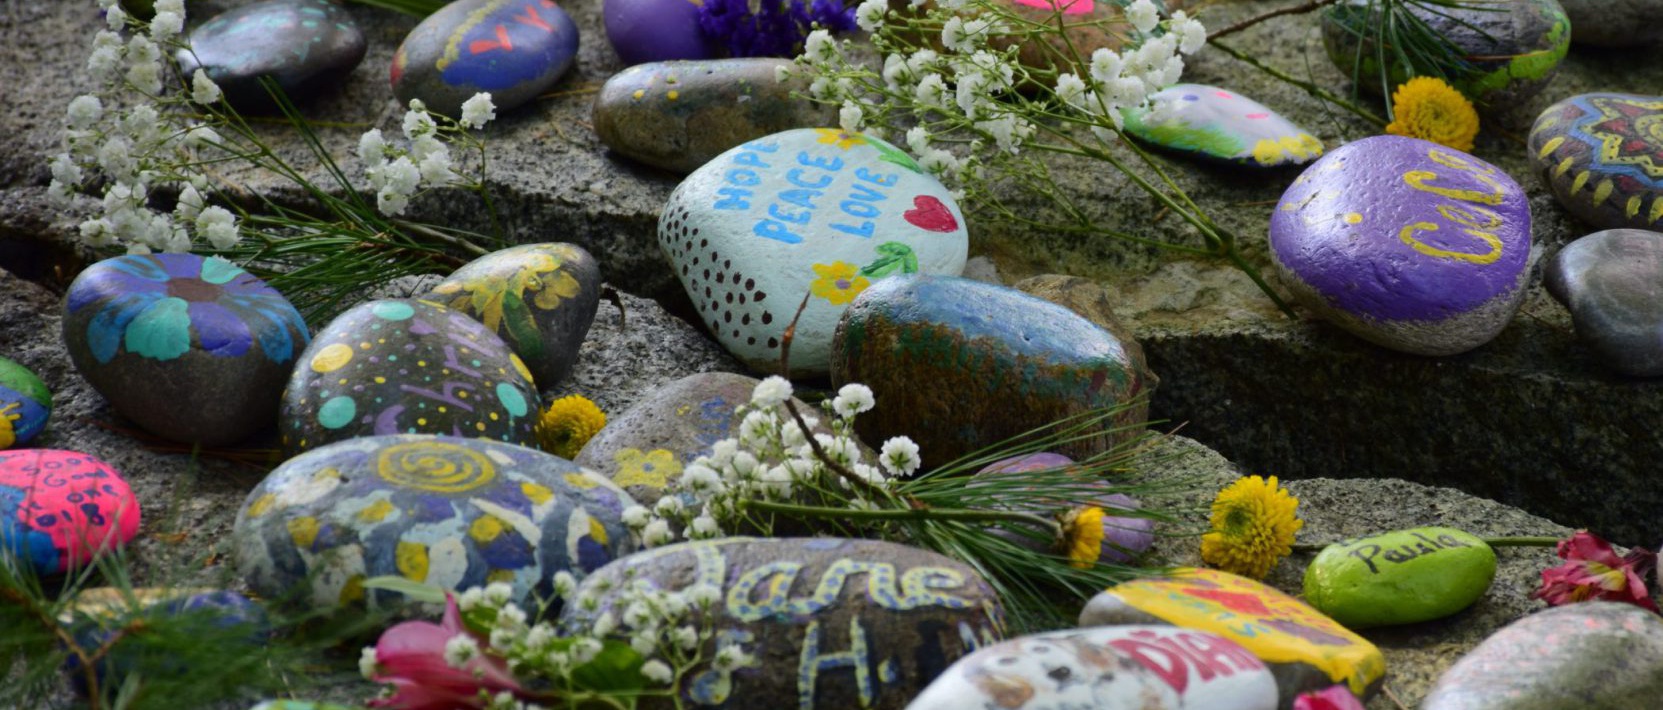 Colorfully painted rocks with flowers